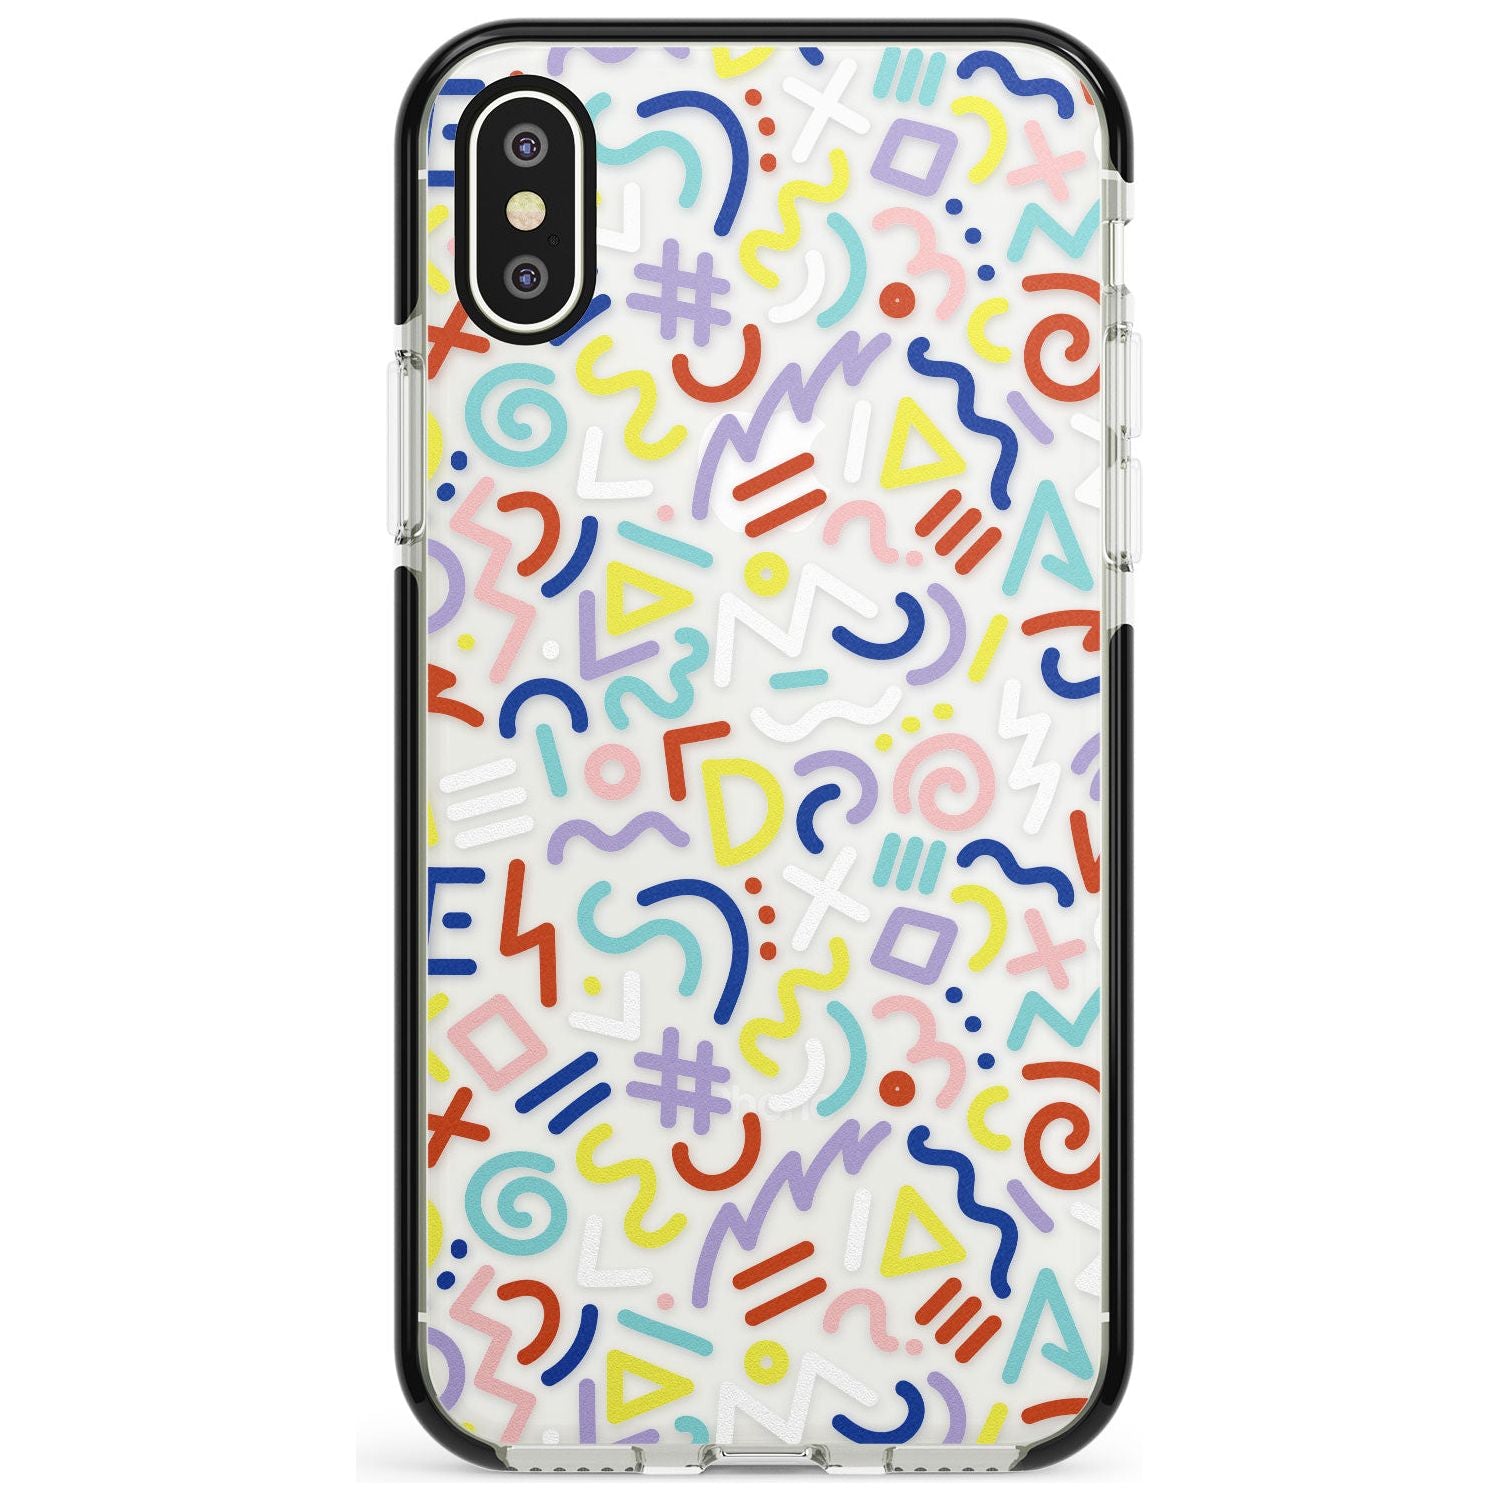 Colourful Mixed Shapes Retro Pattern Design Black Impact Phone Case for iPhone X XS Max XR